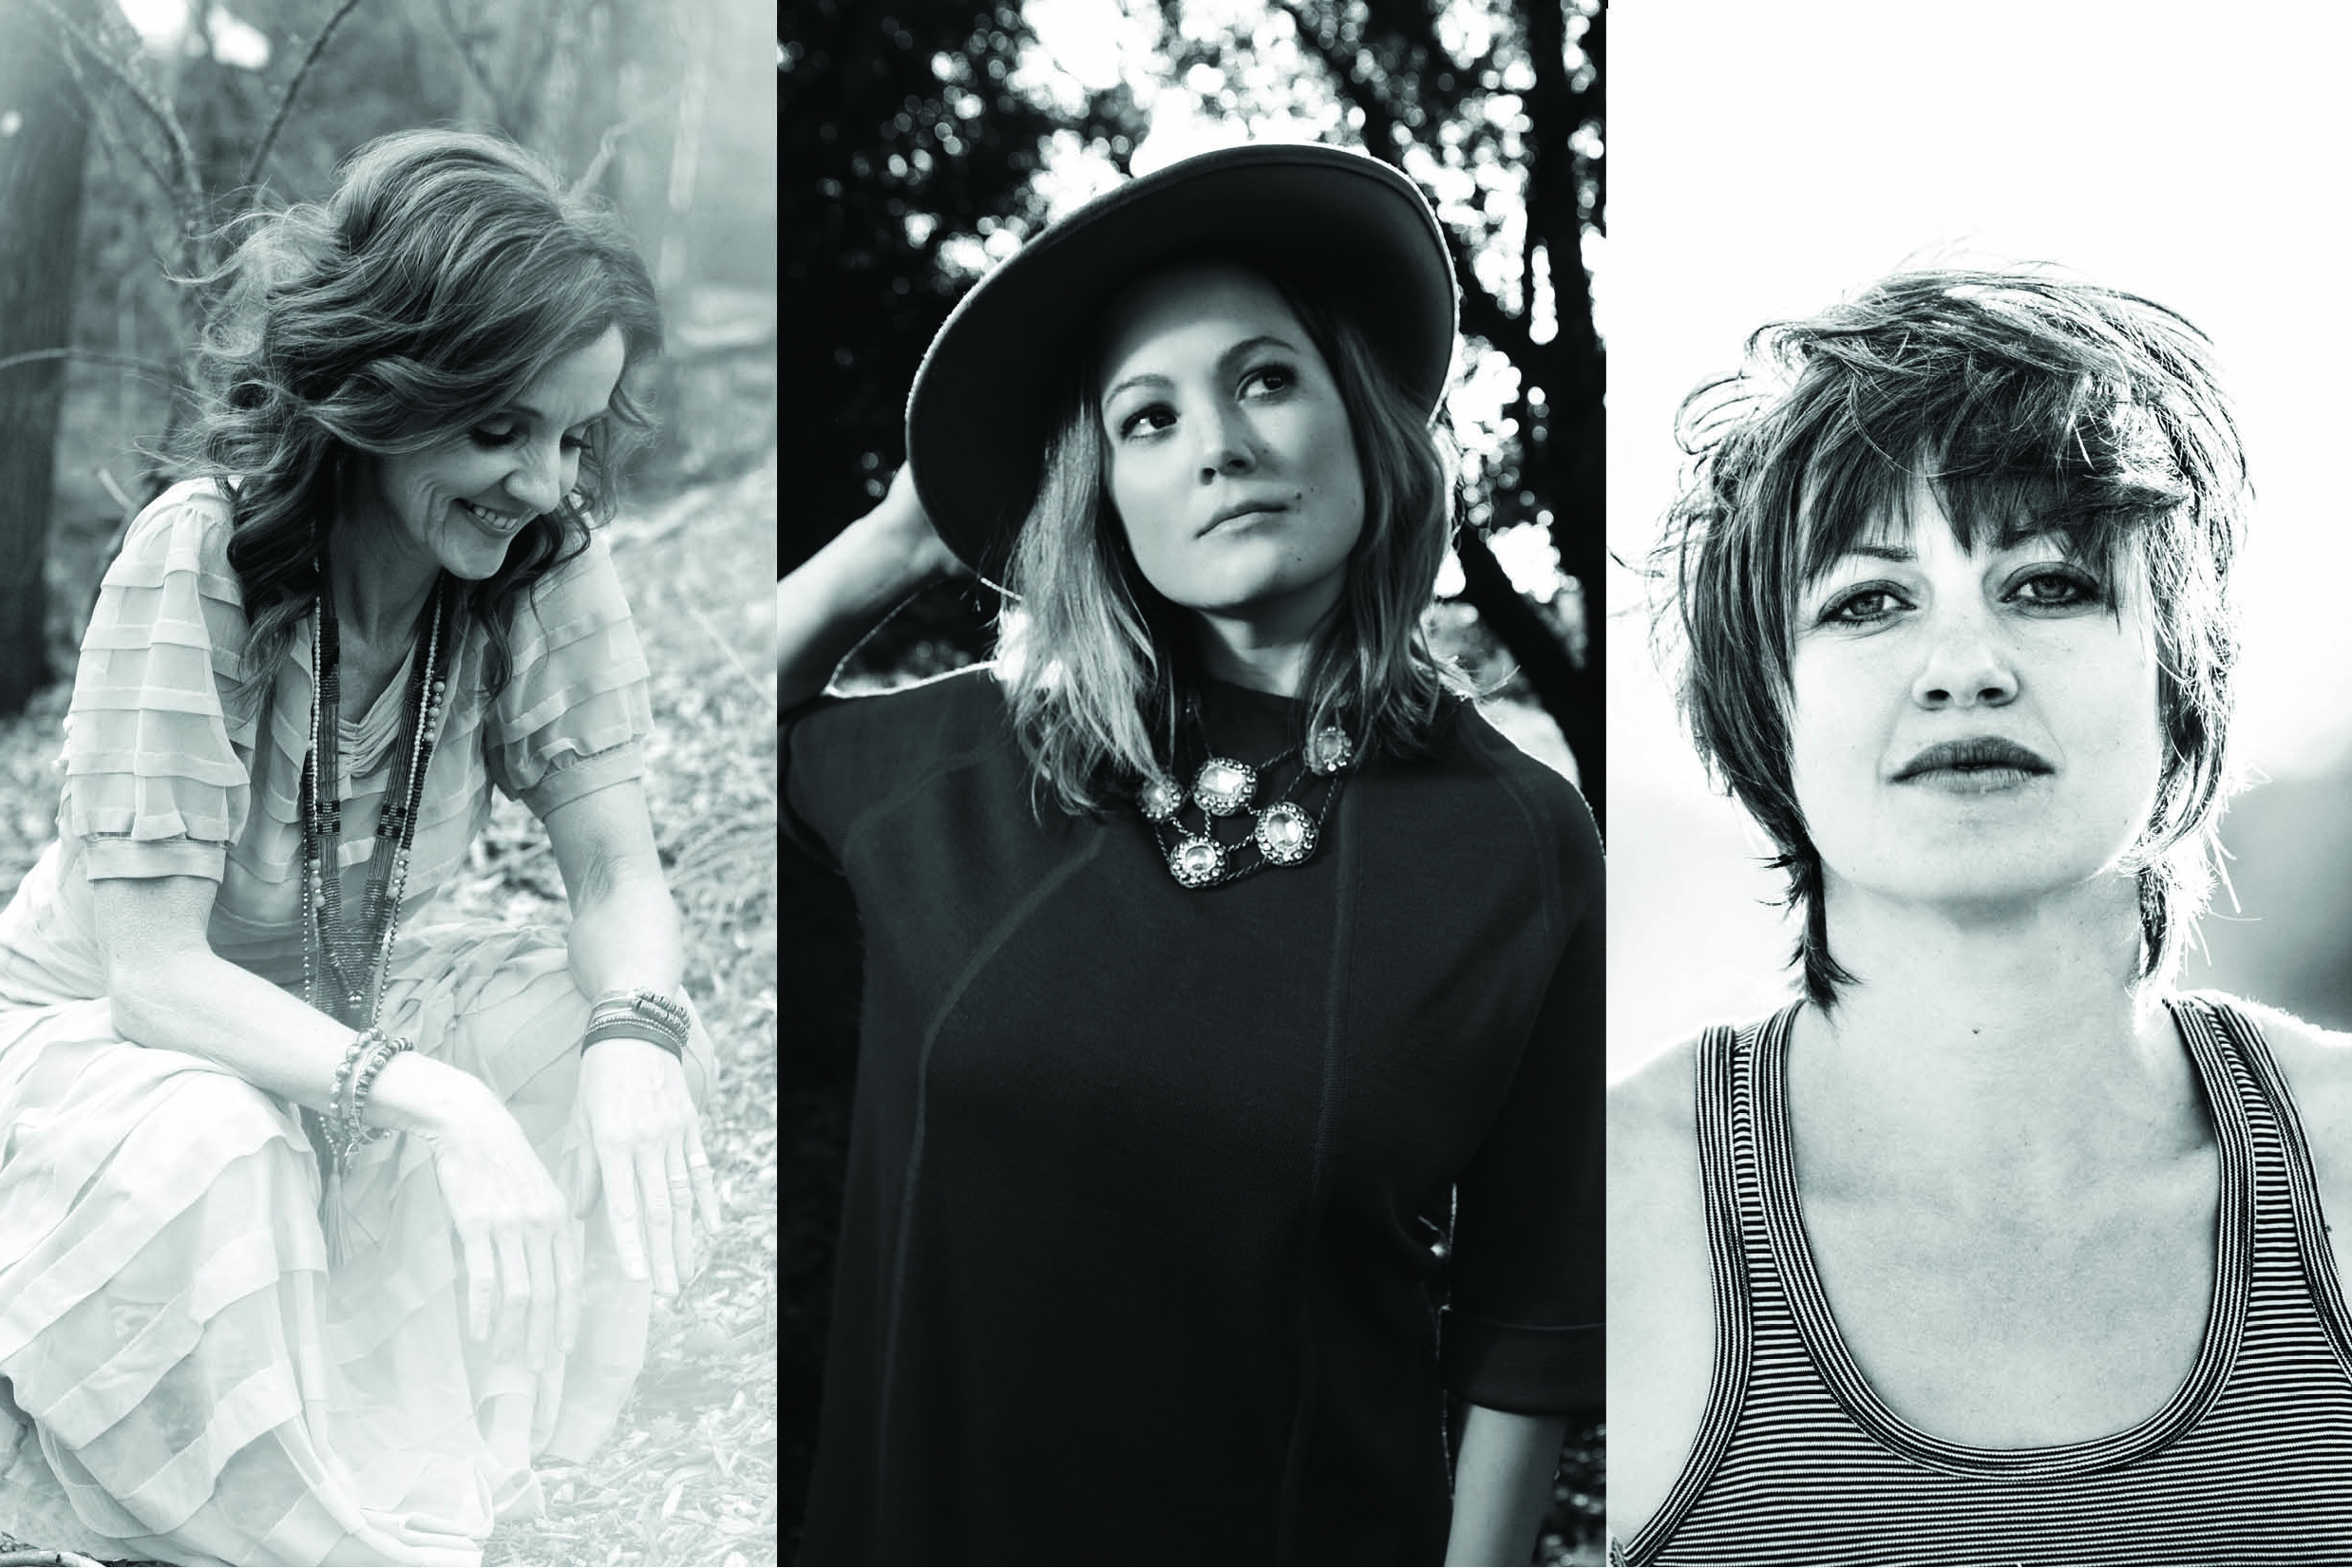 Singer-songwriters from left, Patty Griffin, Sara Watkins, and Anais Mitchell will perform as part of 'The Use Your Voice Tour 2016' at Jorgensen Center for the Performing Arts on Saturday, March 5.